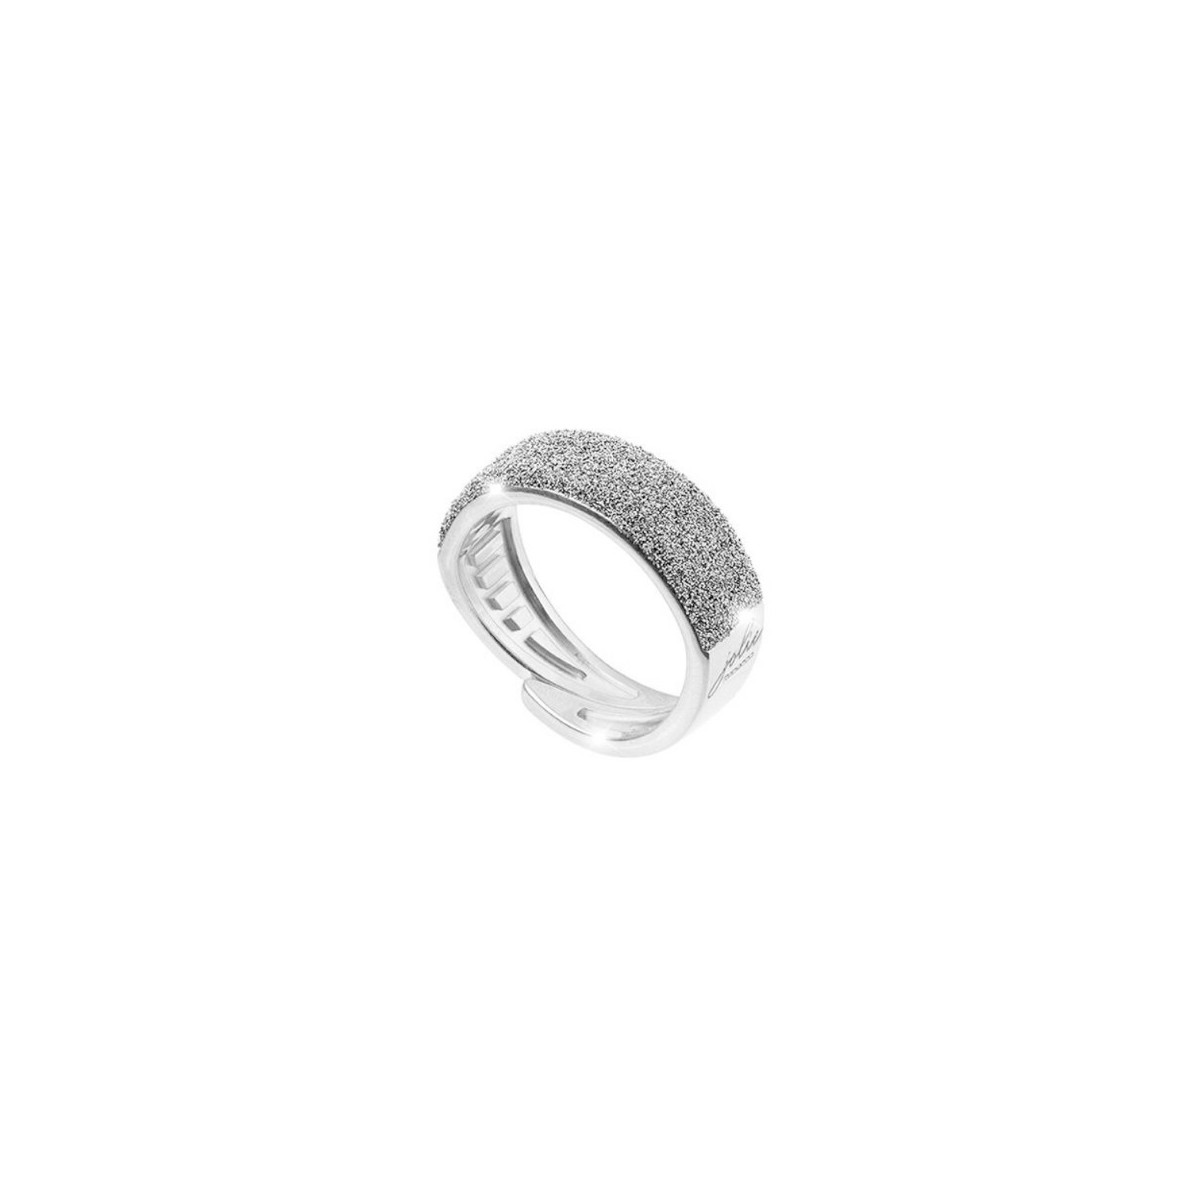 SILVER AND DIAMOND DUST RING